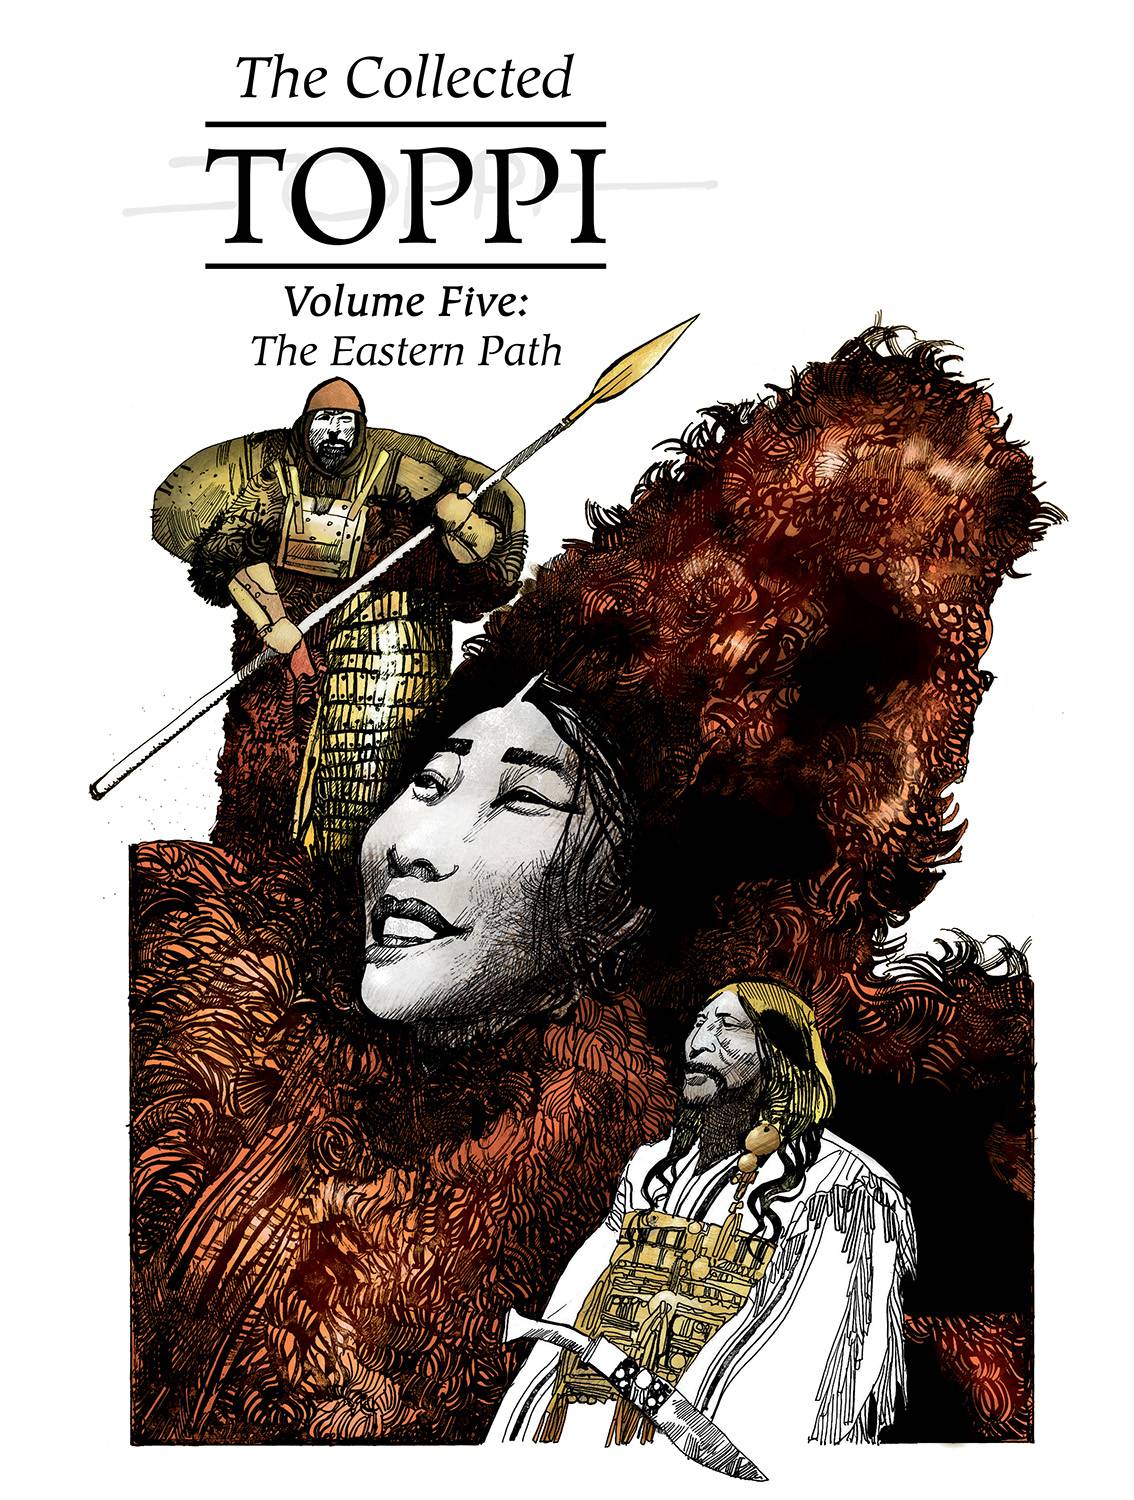 The Collected Toppi vol 5: The Eastern Path h/c